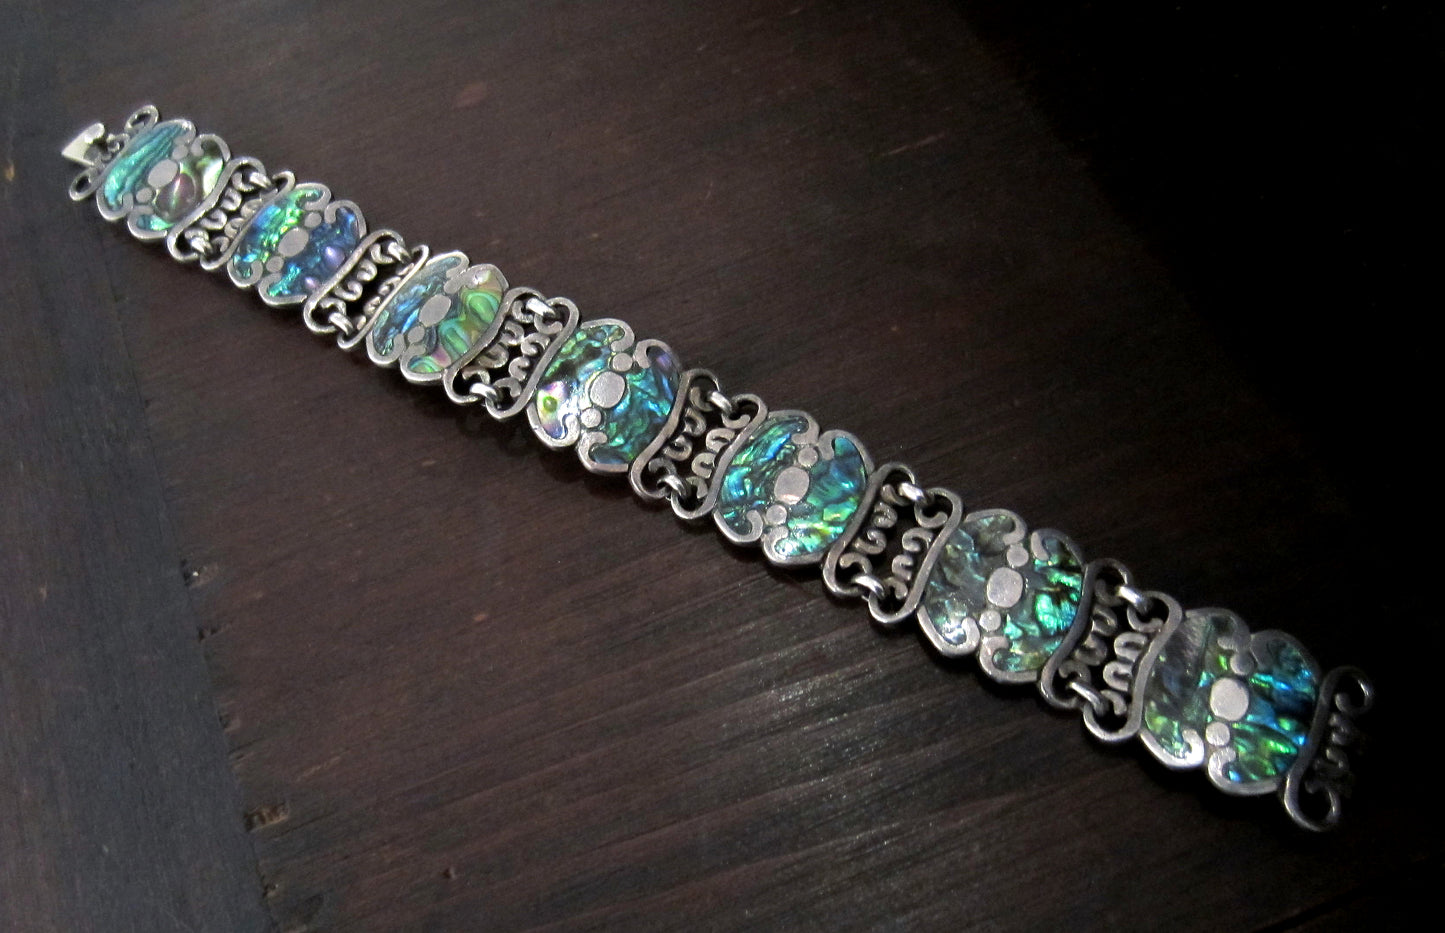 SOLD: Mid-Century Melesio Rodriguez Abalone Bracelet Sterling, Taxco Mexico c. 1950